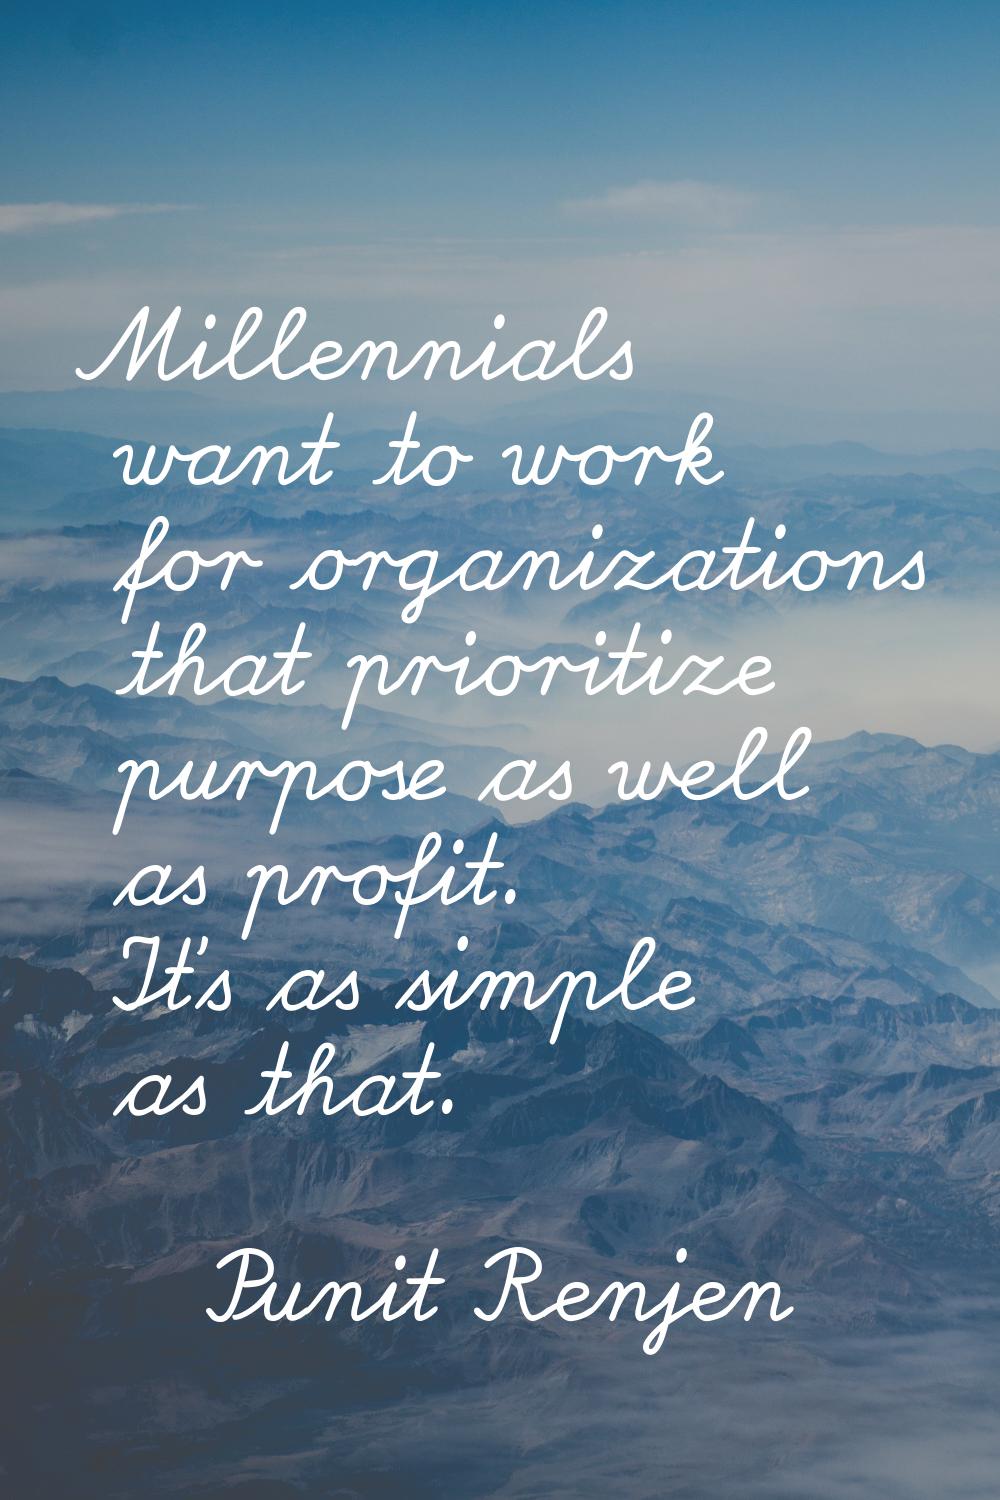 Millennials want to work for organizations that prioritize purpose as well as profit. It's as simpl